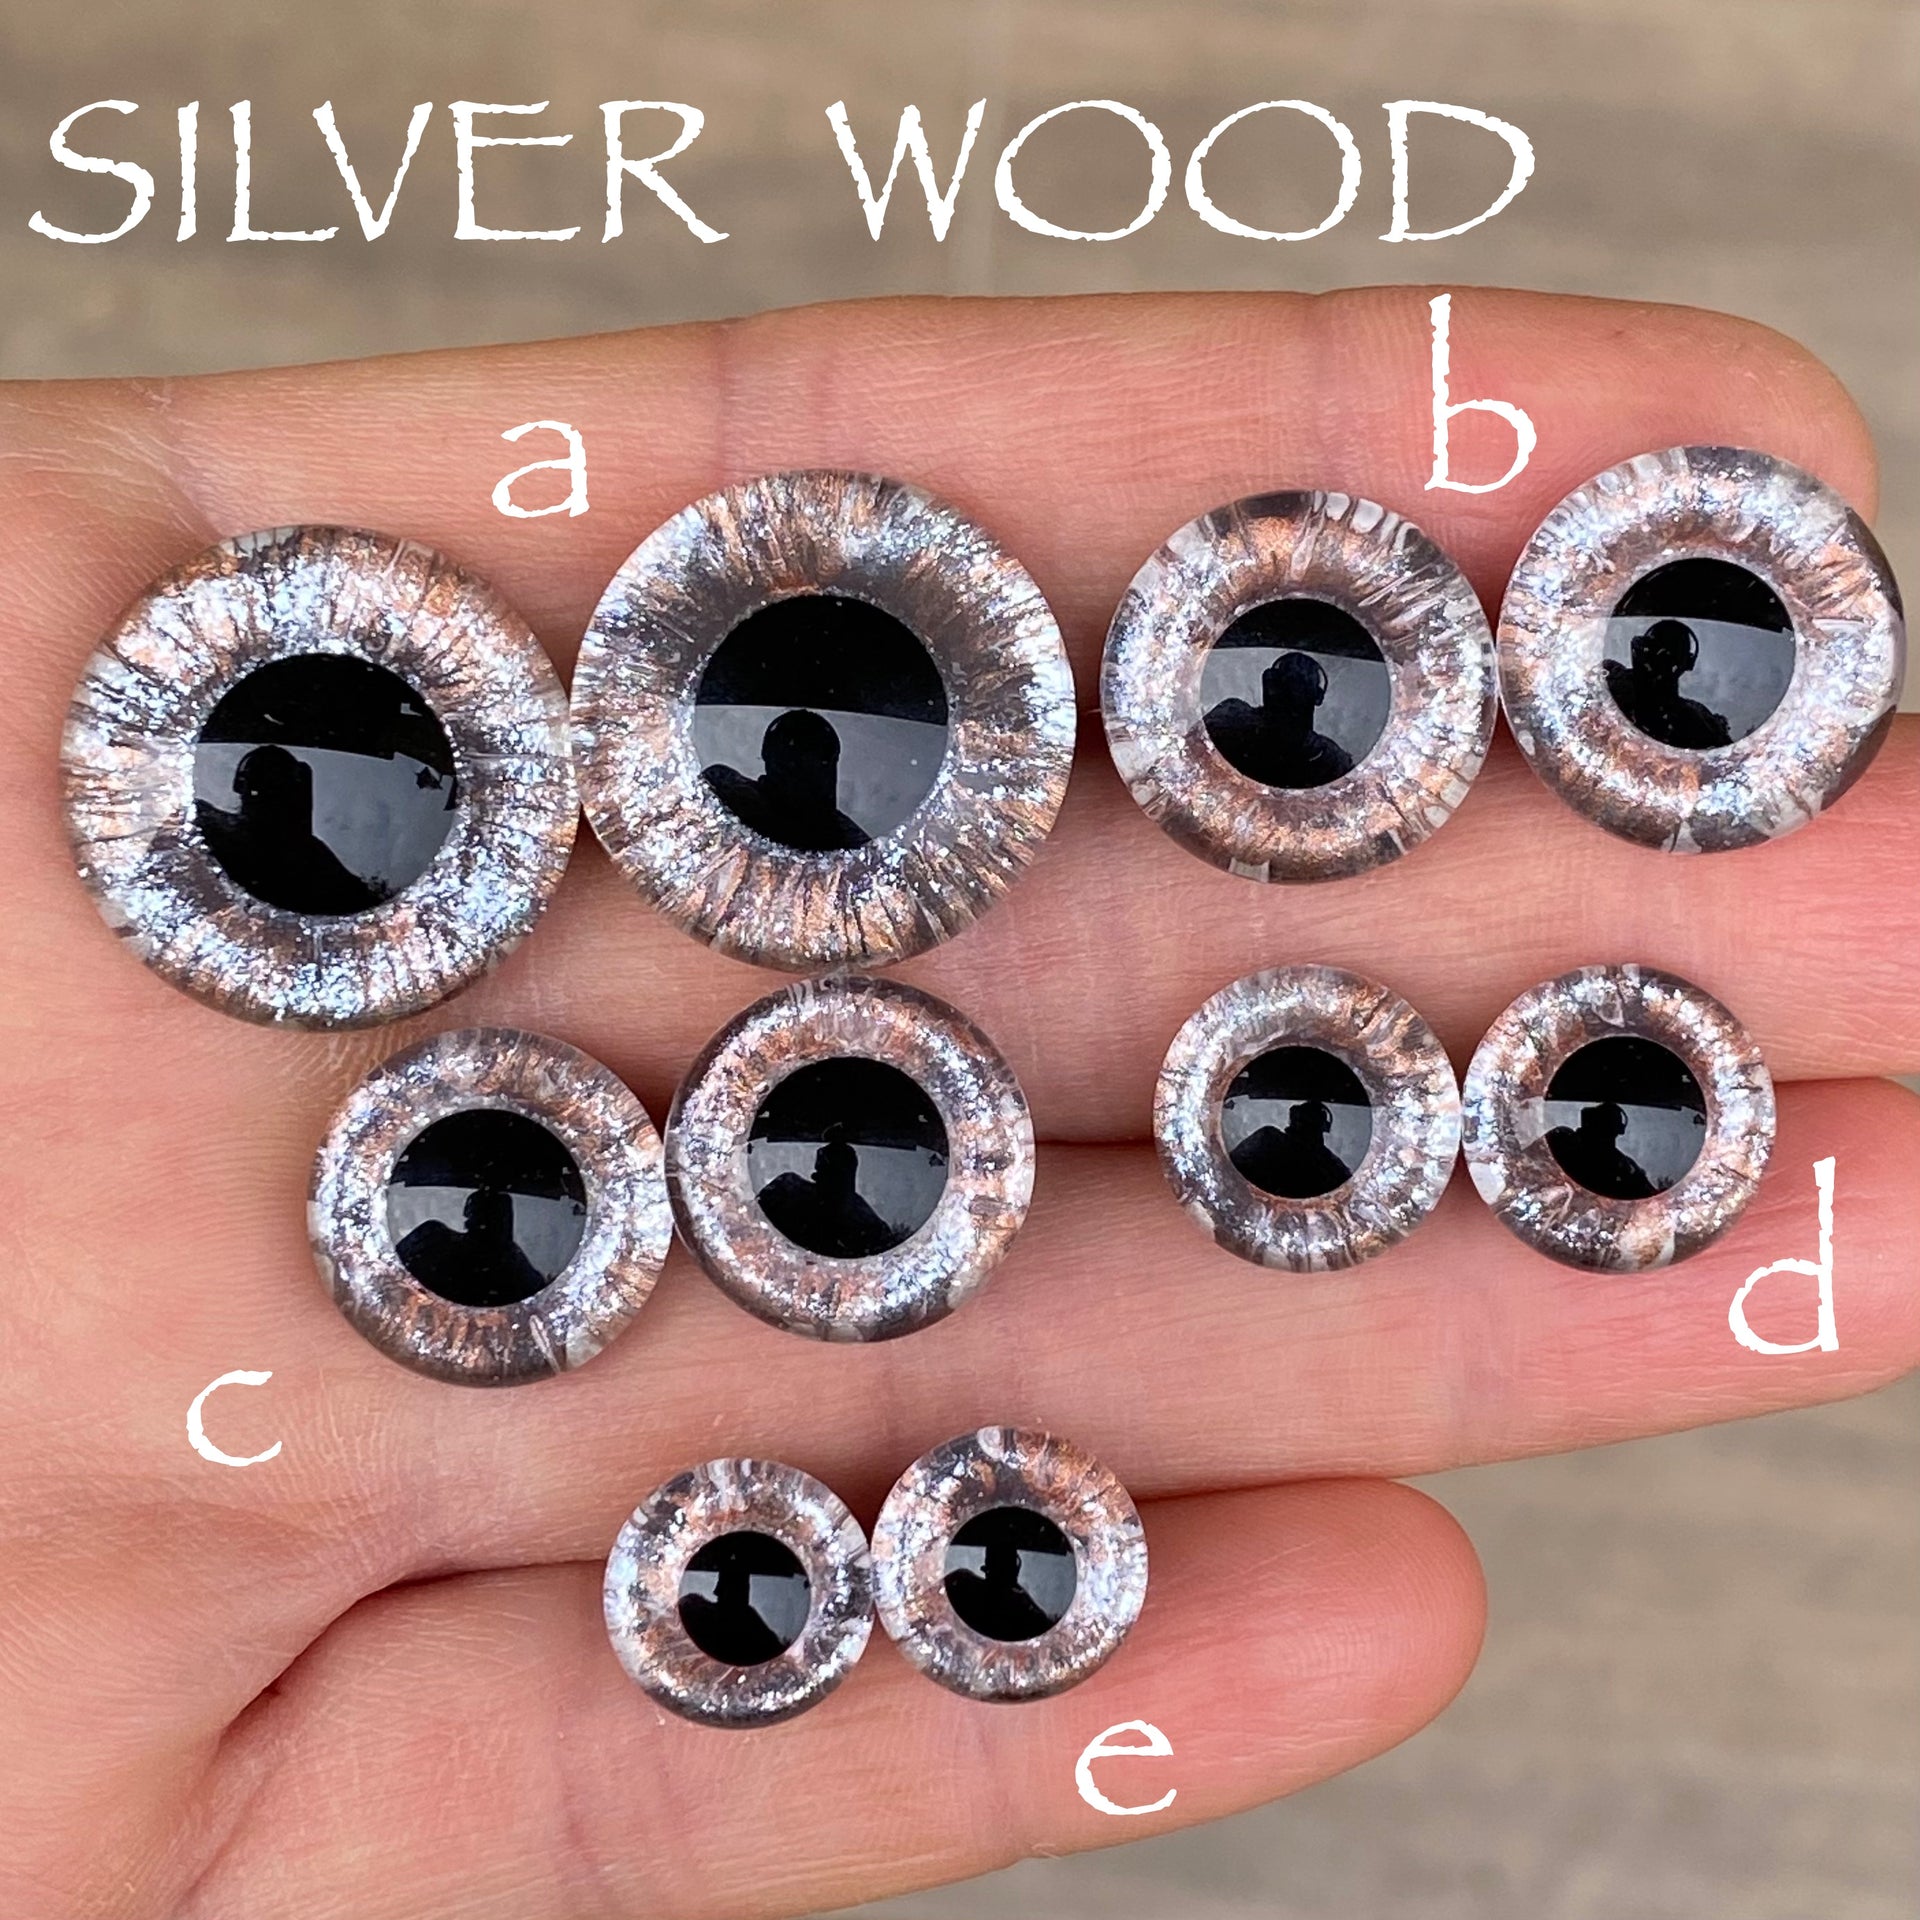 Hand Painted Eyes - Silver Wood